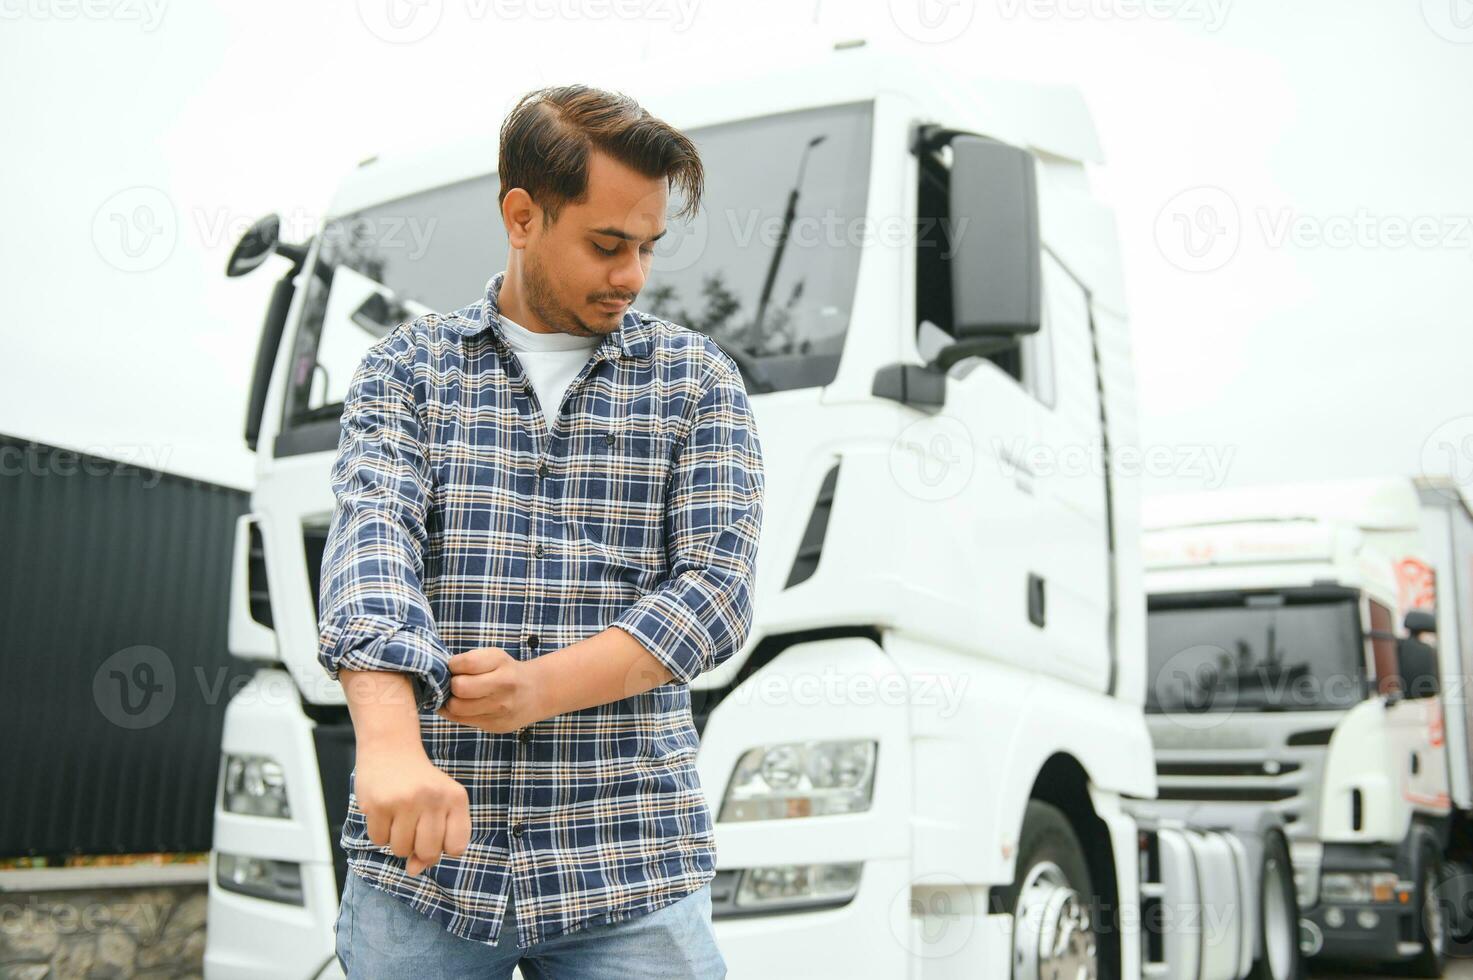 Young Indian truck driver. Concept of road freight transportation photo